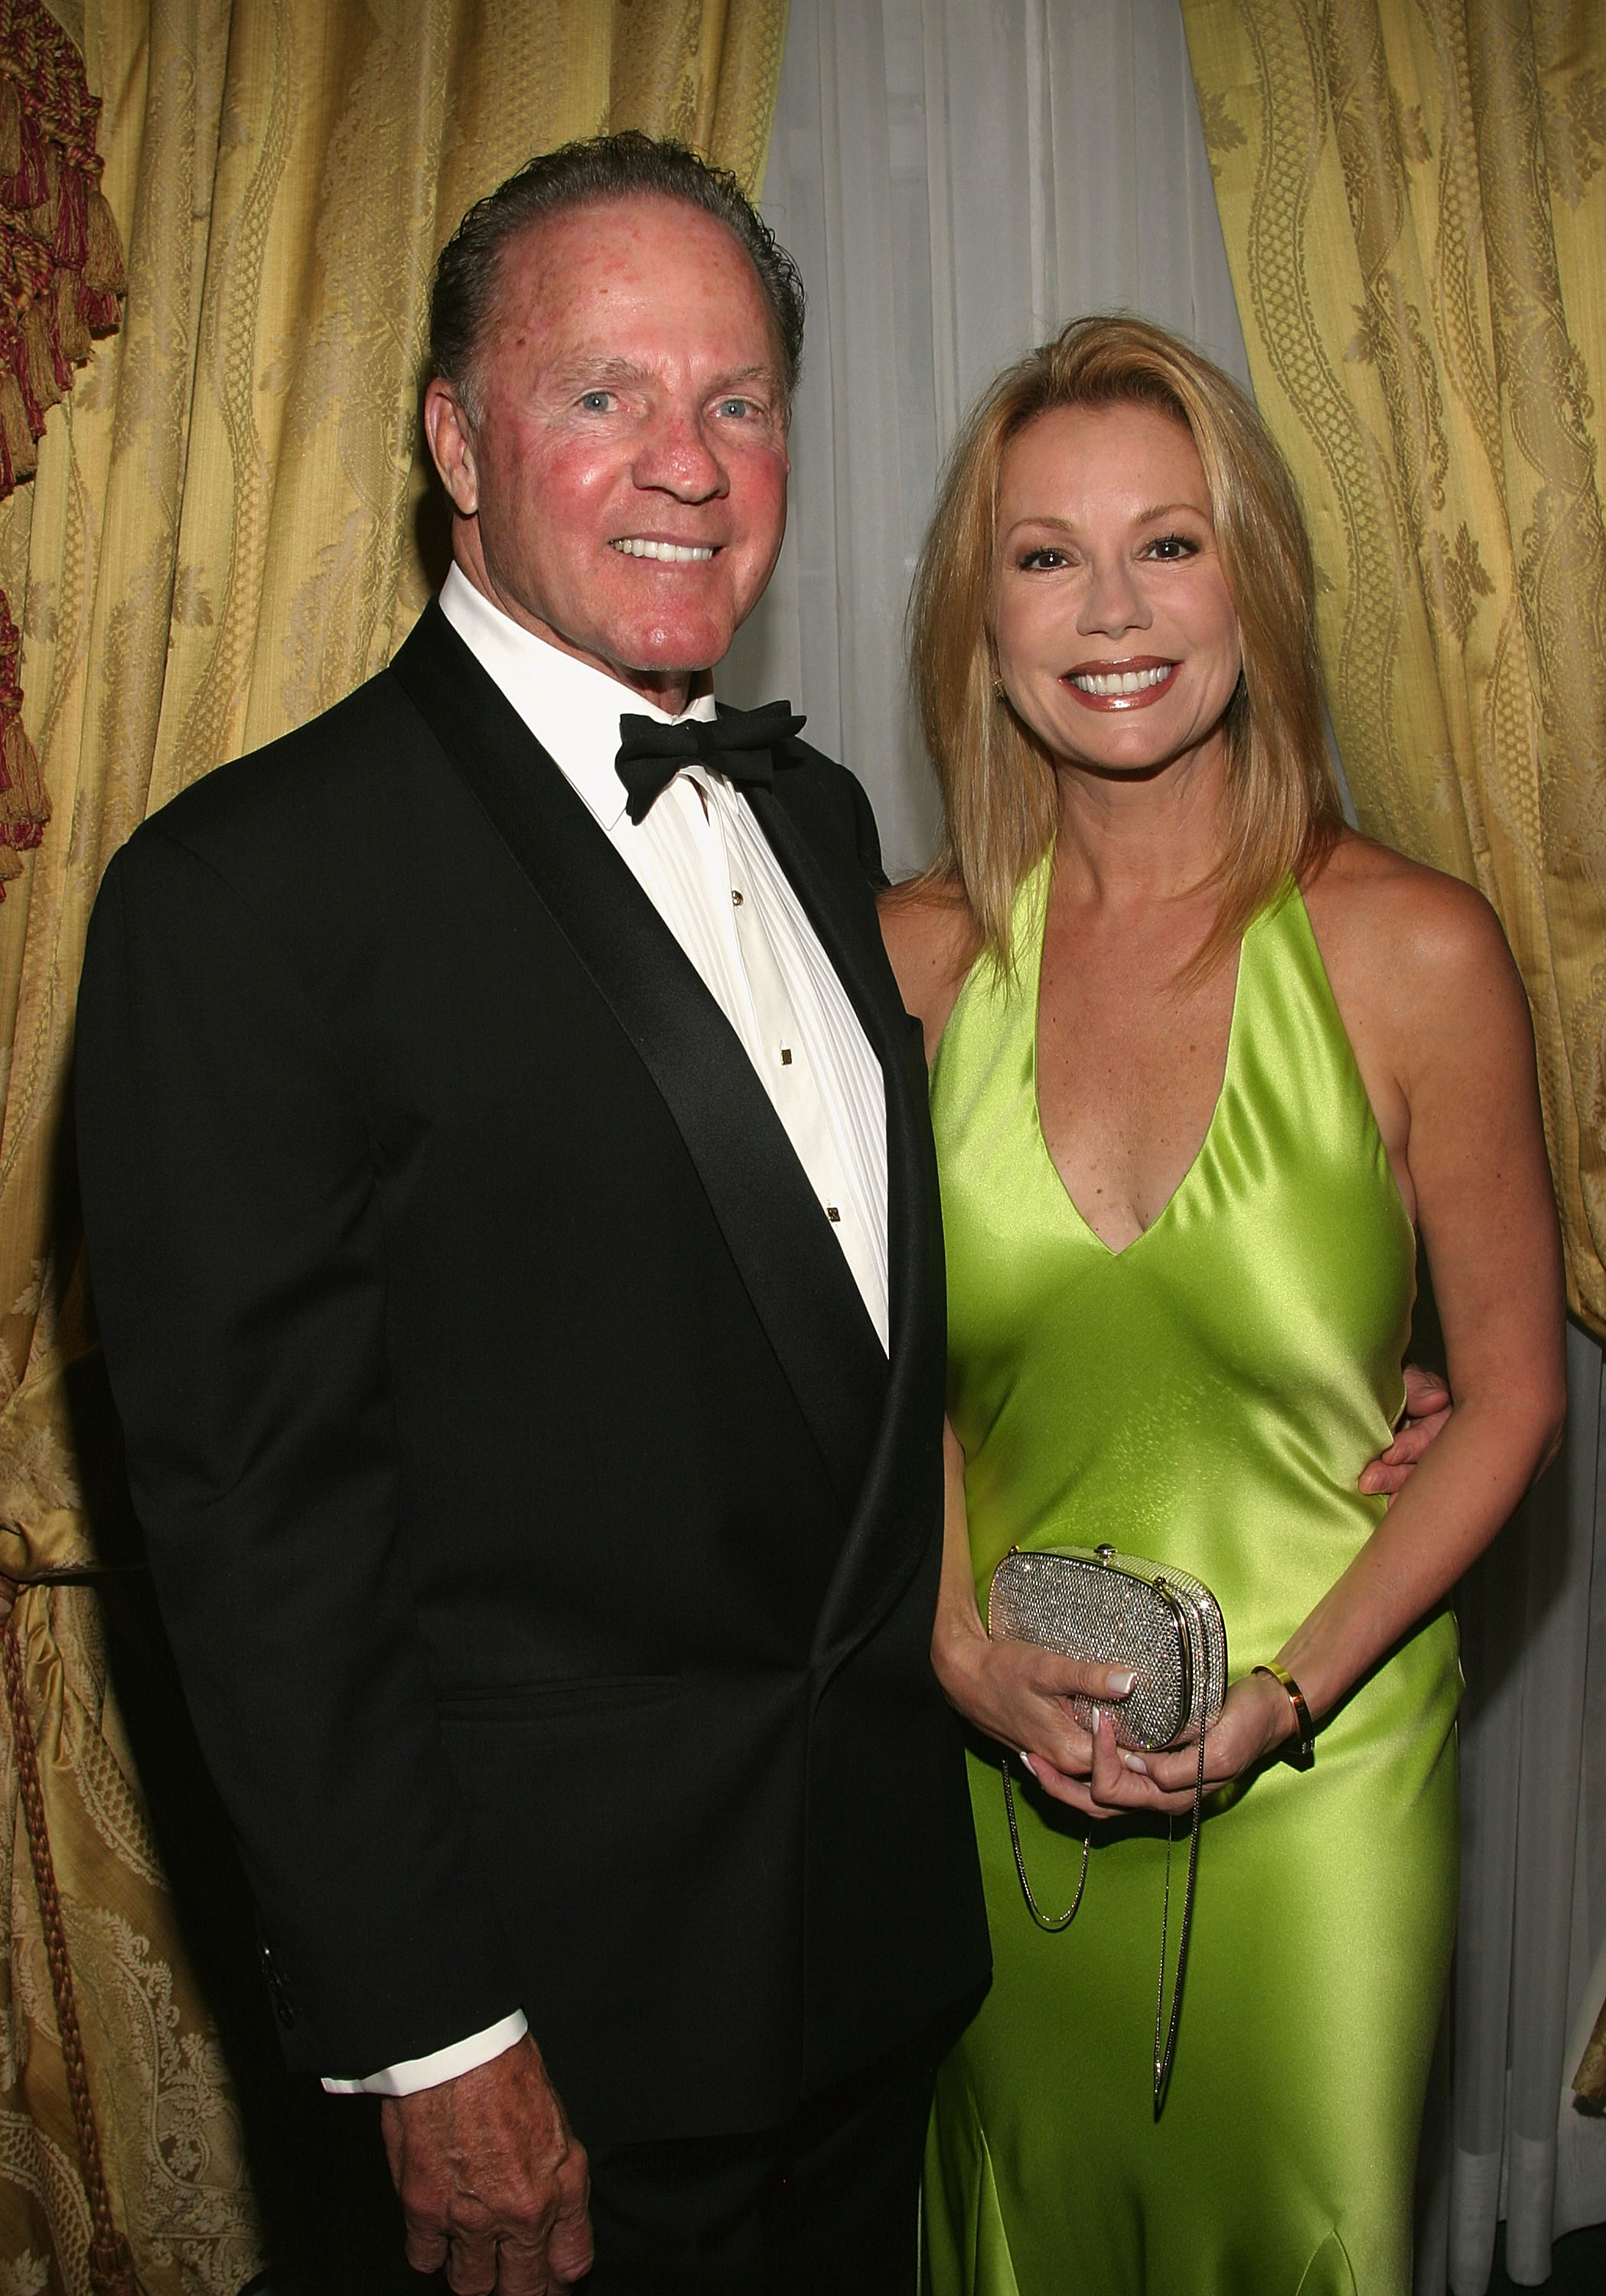 Former Sportcaster Frank Gifford and Television personality Kathy Lee Gifford attend the Bal Du Prentemps Benefit for the Parkinsons Disease Foundation on May 18, 2004 in New York City | Source: Getty Images